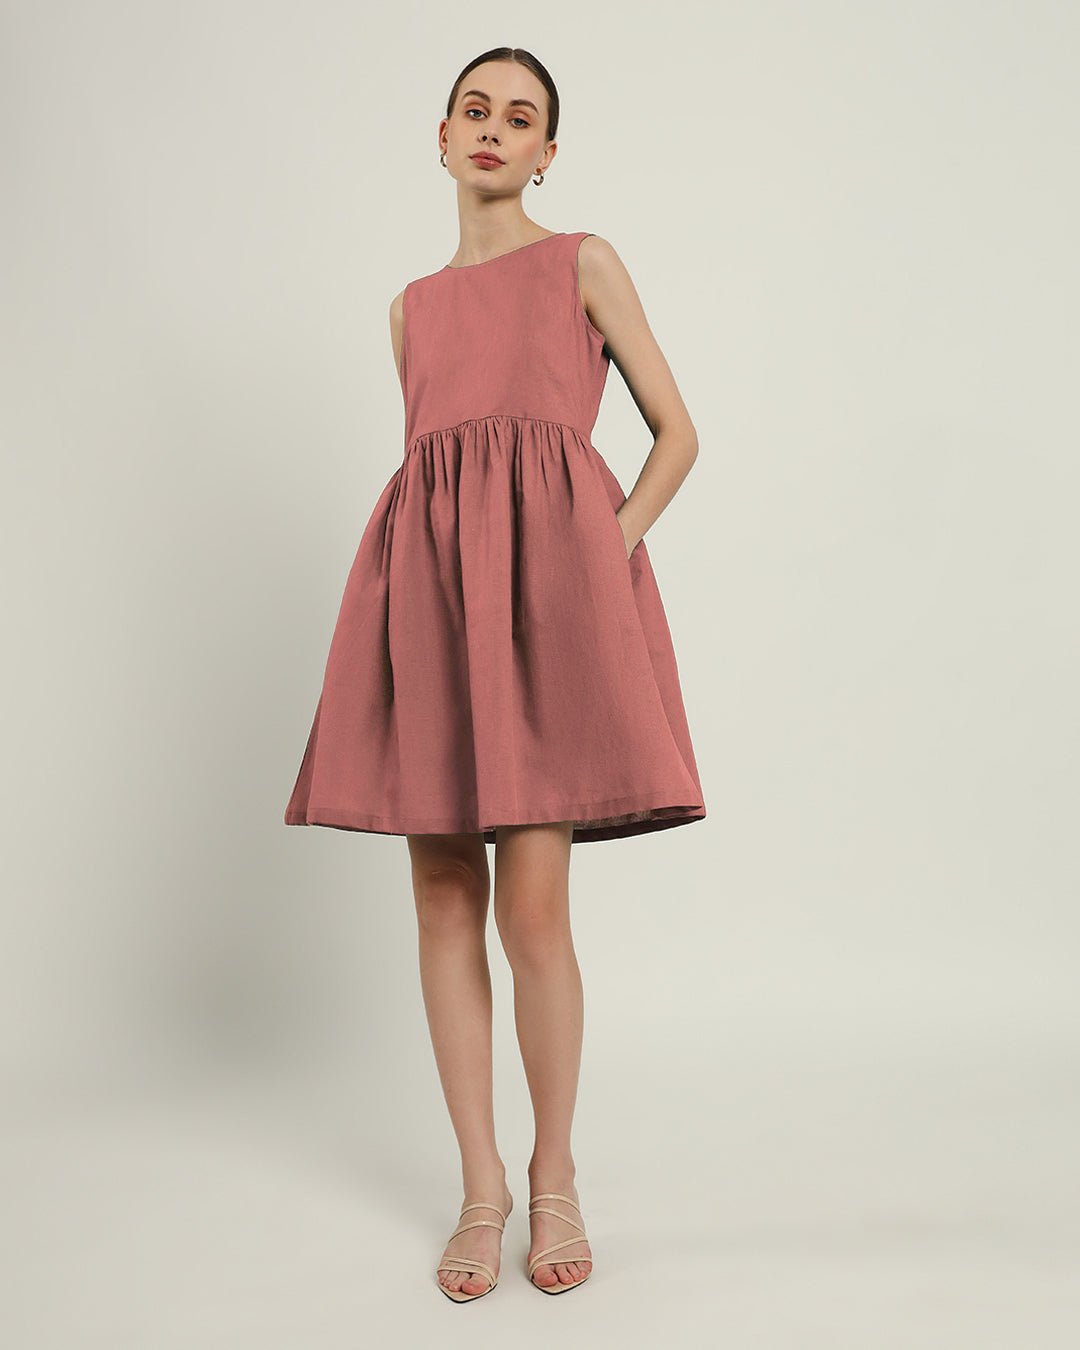 The Chania Ivory Pink Cotton Dress